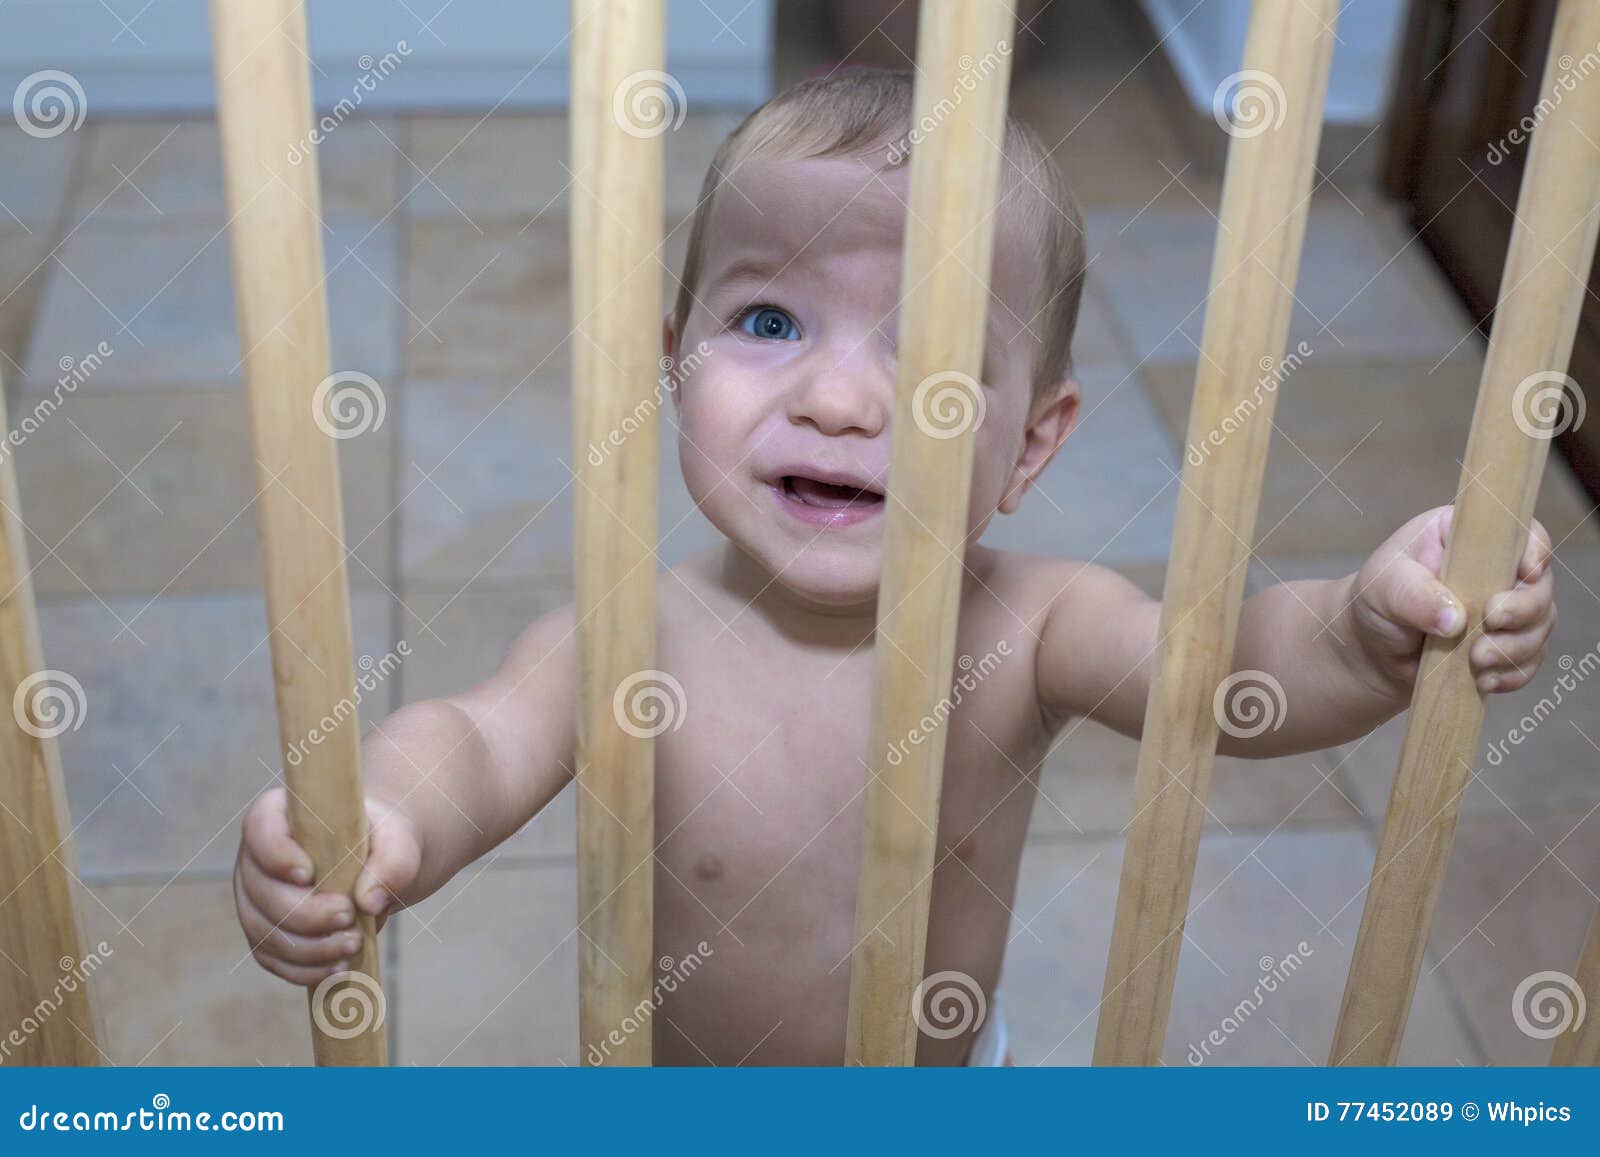 baby boy behind the wooden safety gate of stairs